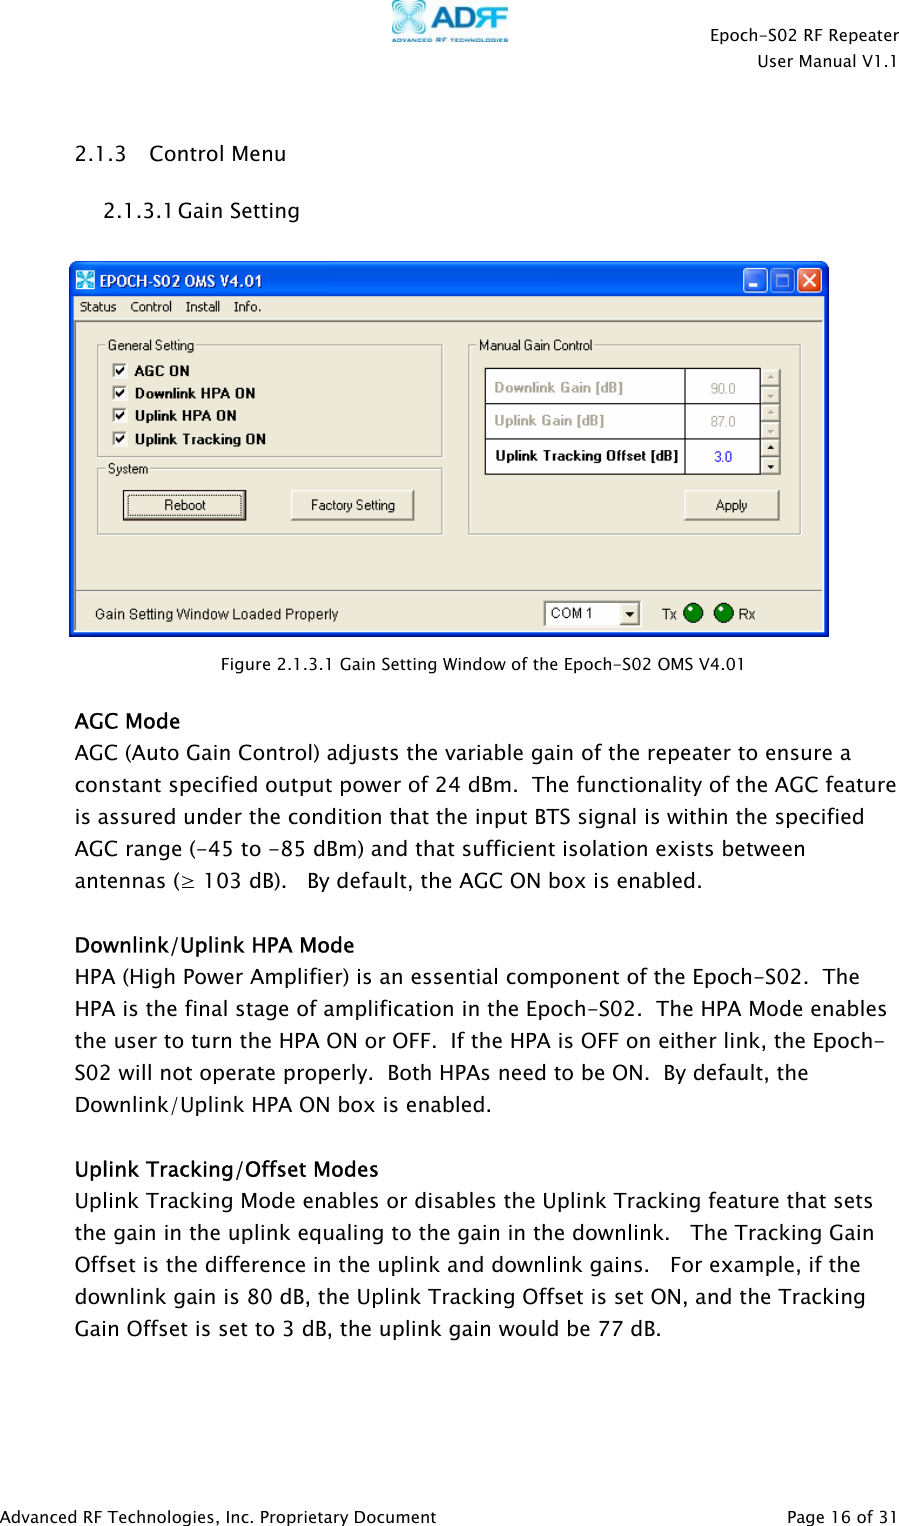    Epoch-S02 RF Repeater  User Manual V1.1   2.1.3 Control Menu 2.1.3.1 Gain Setting    Figure 2.1.3.1 Gain Setting Window of the Epoch-S02 OMS V4.01  AGC Mode AGC (Auto Gain Control) adjusts the variable gain of the repeater to ensure a constant specified output power of 24 dBm.  The functionality of the AGC feature is assured under the condition that the input BTS signal is within the specified AGC range (-45 to -85 dBm) and that sufficient isolation exists between antennas (≥ 103 dB).   By default, the AGC ON box is enabled.  Downlink/Uplink HPA Mode HPA (High Power Amplifier) is an essential component of the Epoch-S02.  The HPA is the final stage of amplification in the Epoch-S02.  The HPA Mode enables the user to turn the HPA ON or OFF.  If the HPA is OFF on either link, the Epoch-S02 will not operate properly.  Both HPAs need to be ON.  By default, the Downlink/Uplink HPA ON box is enabled.  Uplink Tracking/Offset Modes Uplink Tracking Mode enables or disables the Uplink Tracking feature that sets the gain in the uplink equaling to the gain in the downlink.   The Tracking Gain Offset is the difference in the uplink and downlink gains.   For example, if the downlink gain is 80 dB, the Uplink Tracking Offset is set ON, and the Tracking Gain Offset is set to 3 dB, the uplink gain would be 77 dB.      Advanced RF Technologies, Inc. Proprietary Document   Page 16 of 31  